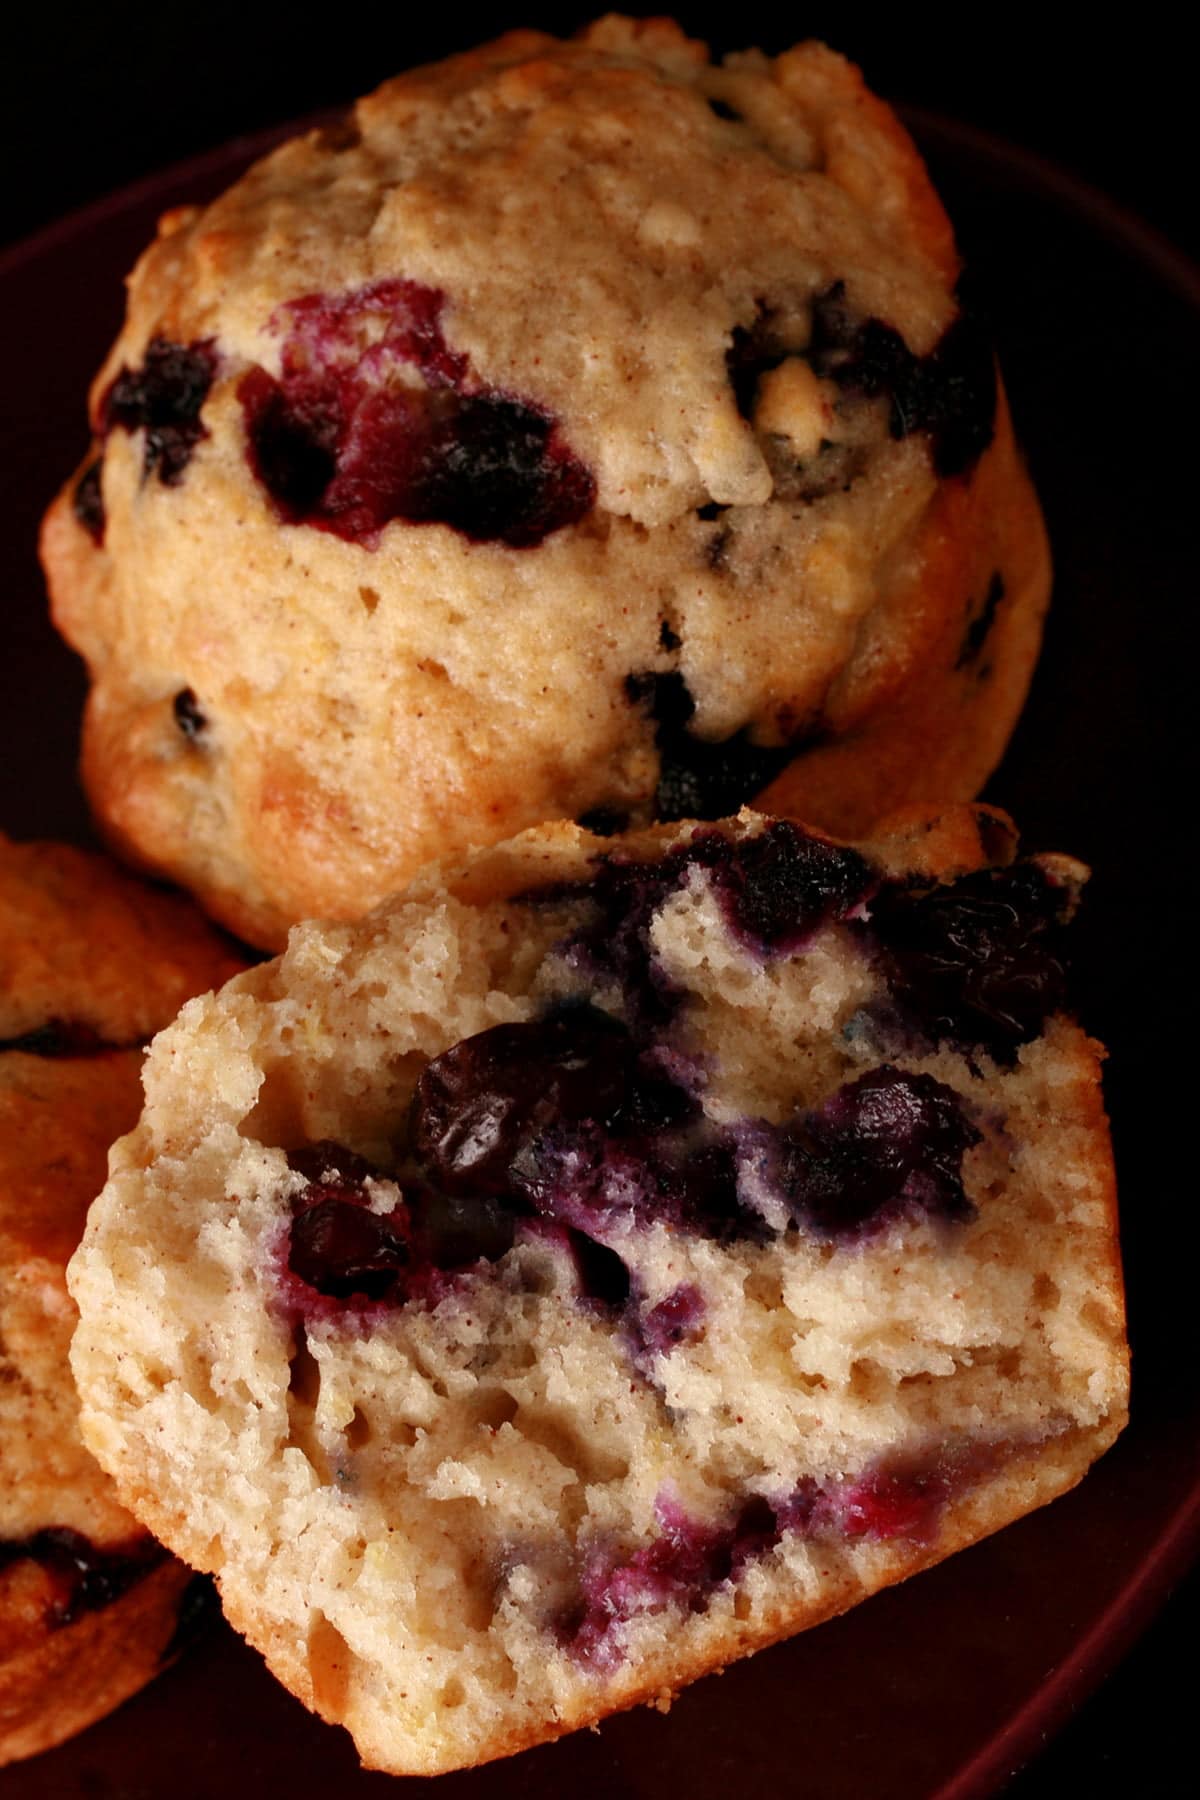 A small purple plate holds two and a half apple blueberry muffins.